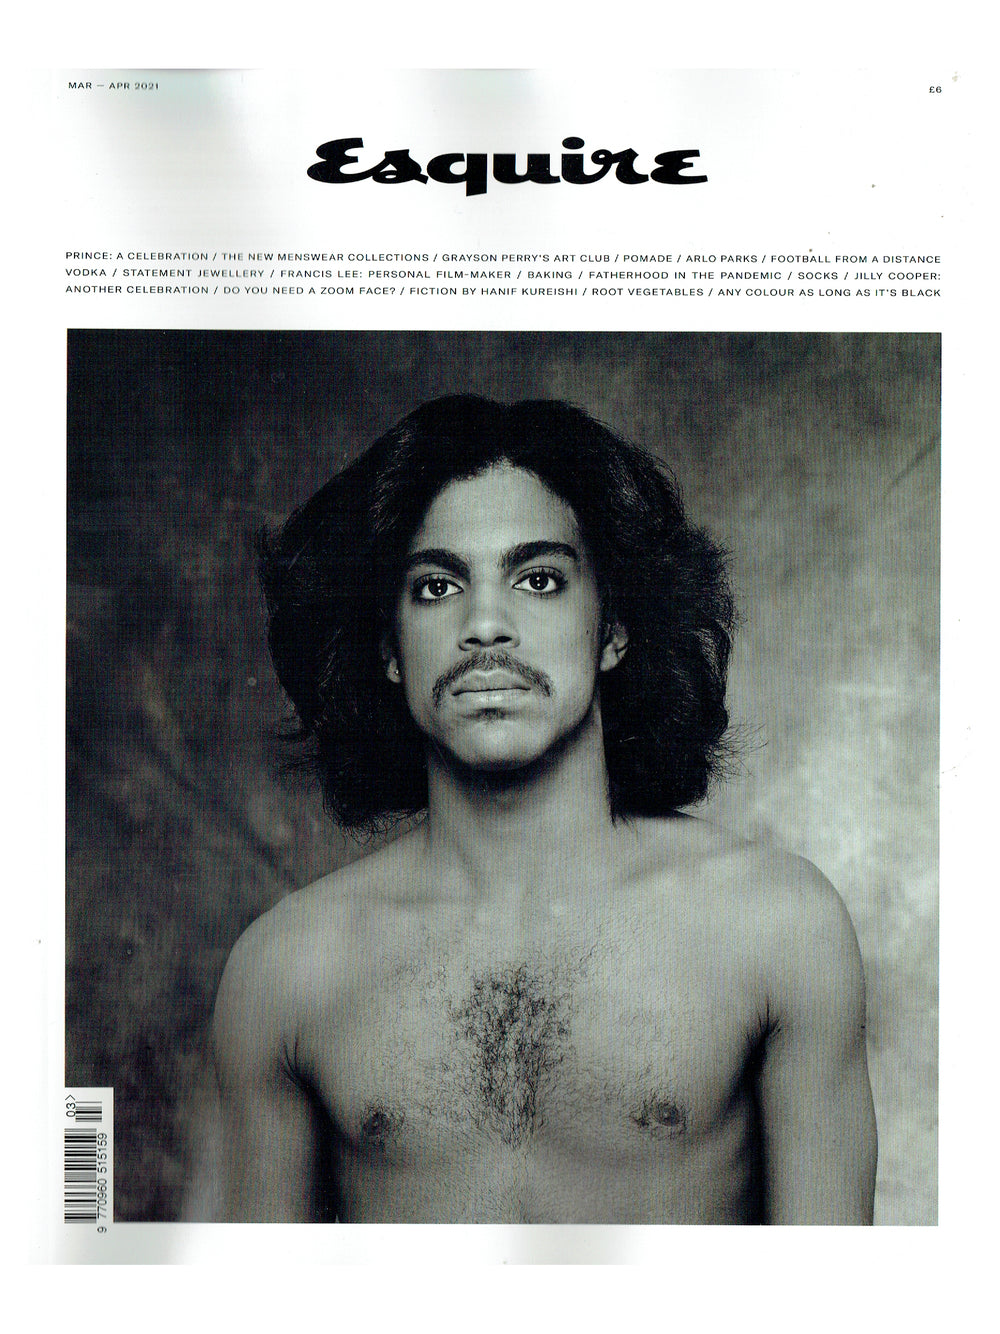 Prince – Esquire Magazine March April 2021 Glossy Cover & 10 Pages Inside